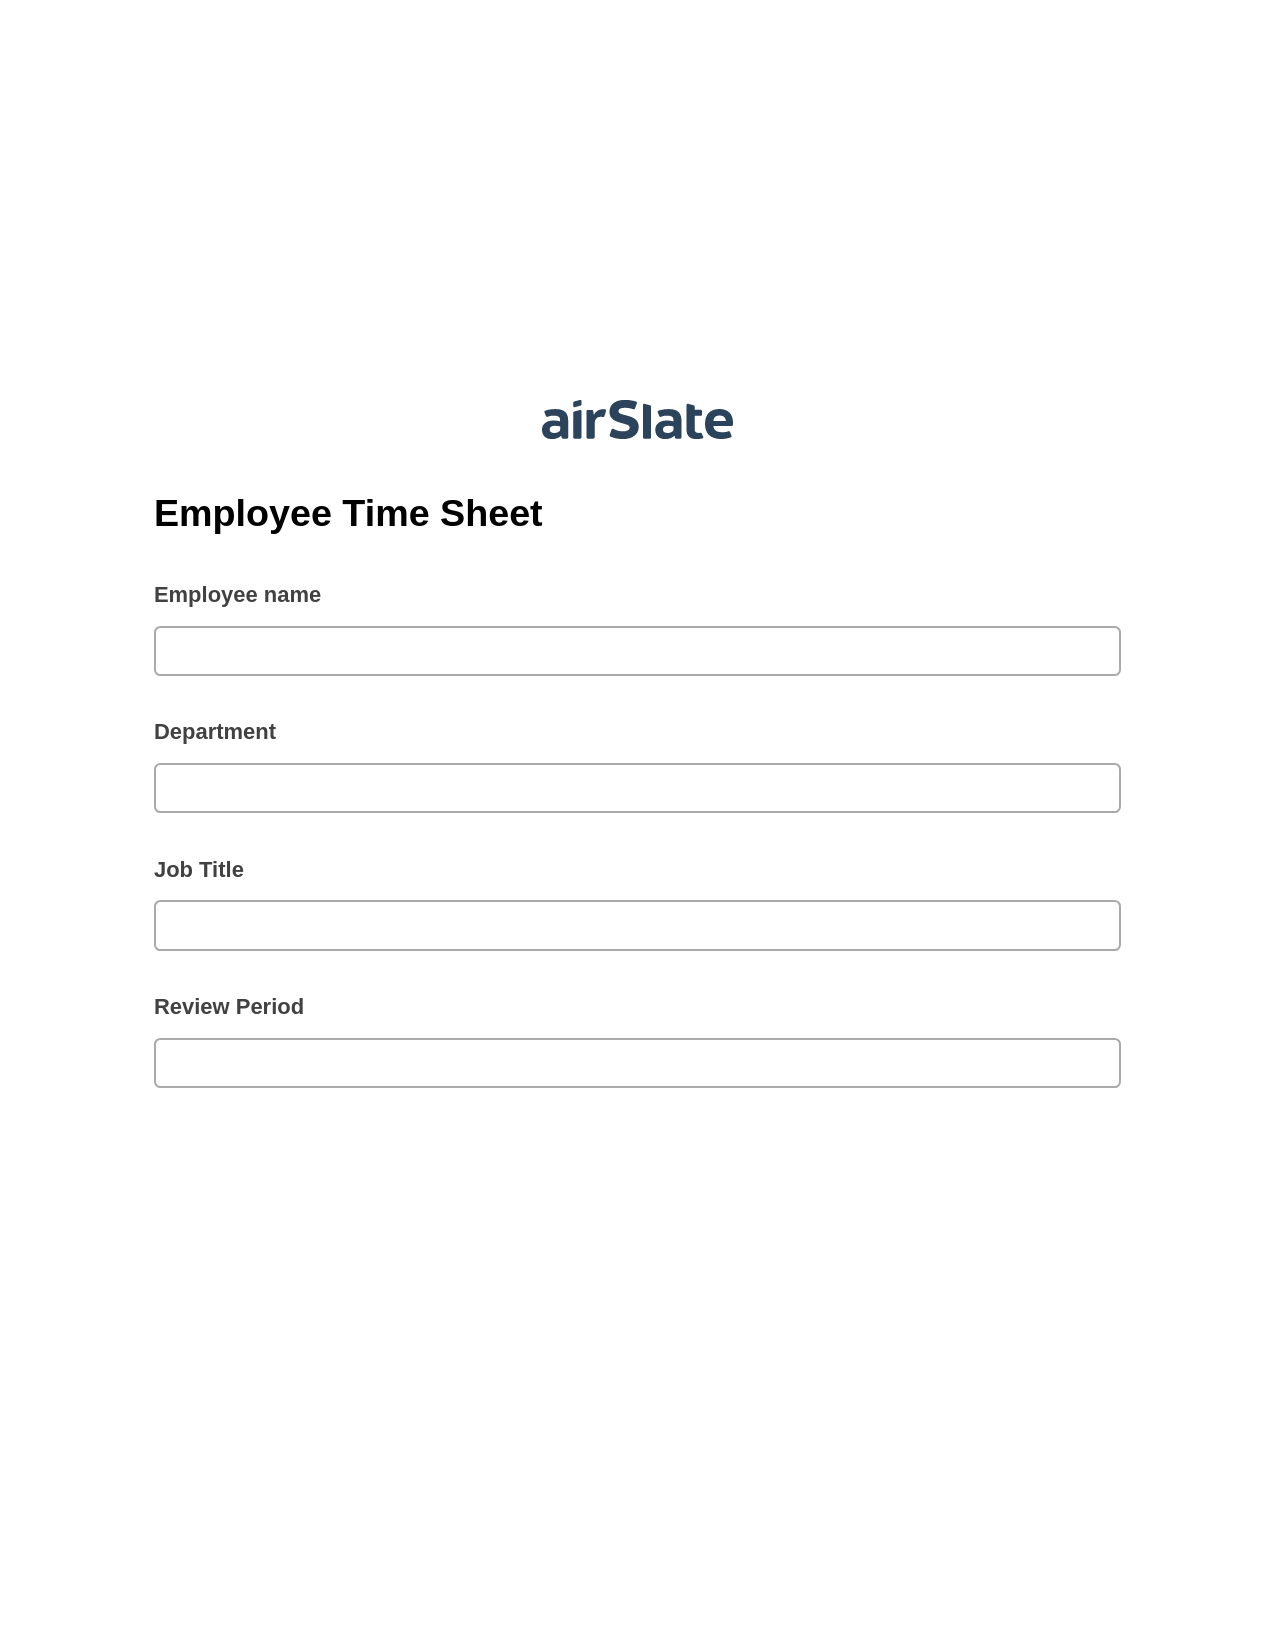 Multirole Employee Time Sheet Pre-fill Dropdowns from Office 365 Excel Bot, Update Audit Trail Bot, Export to Excel 365 Bot